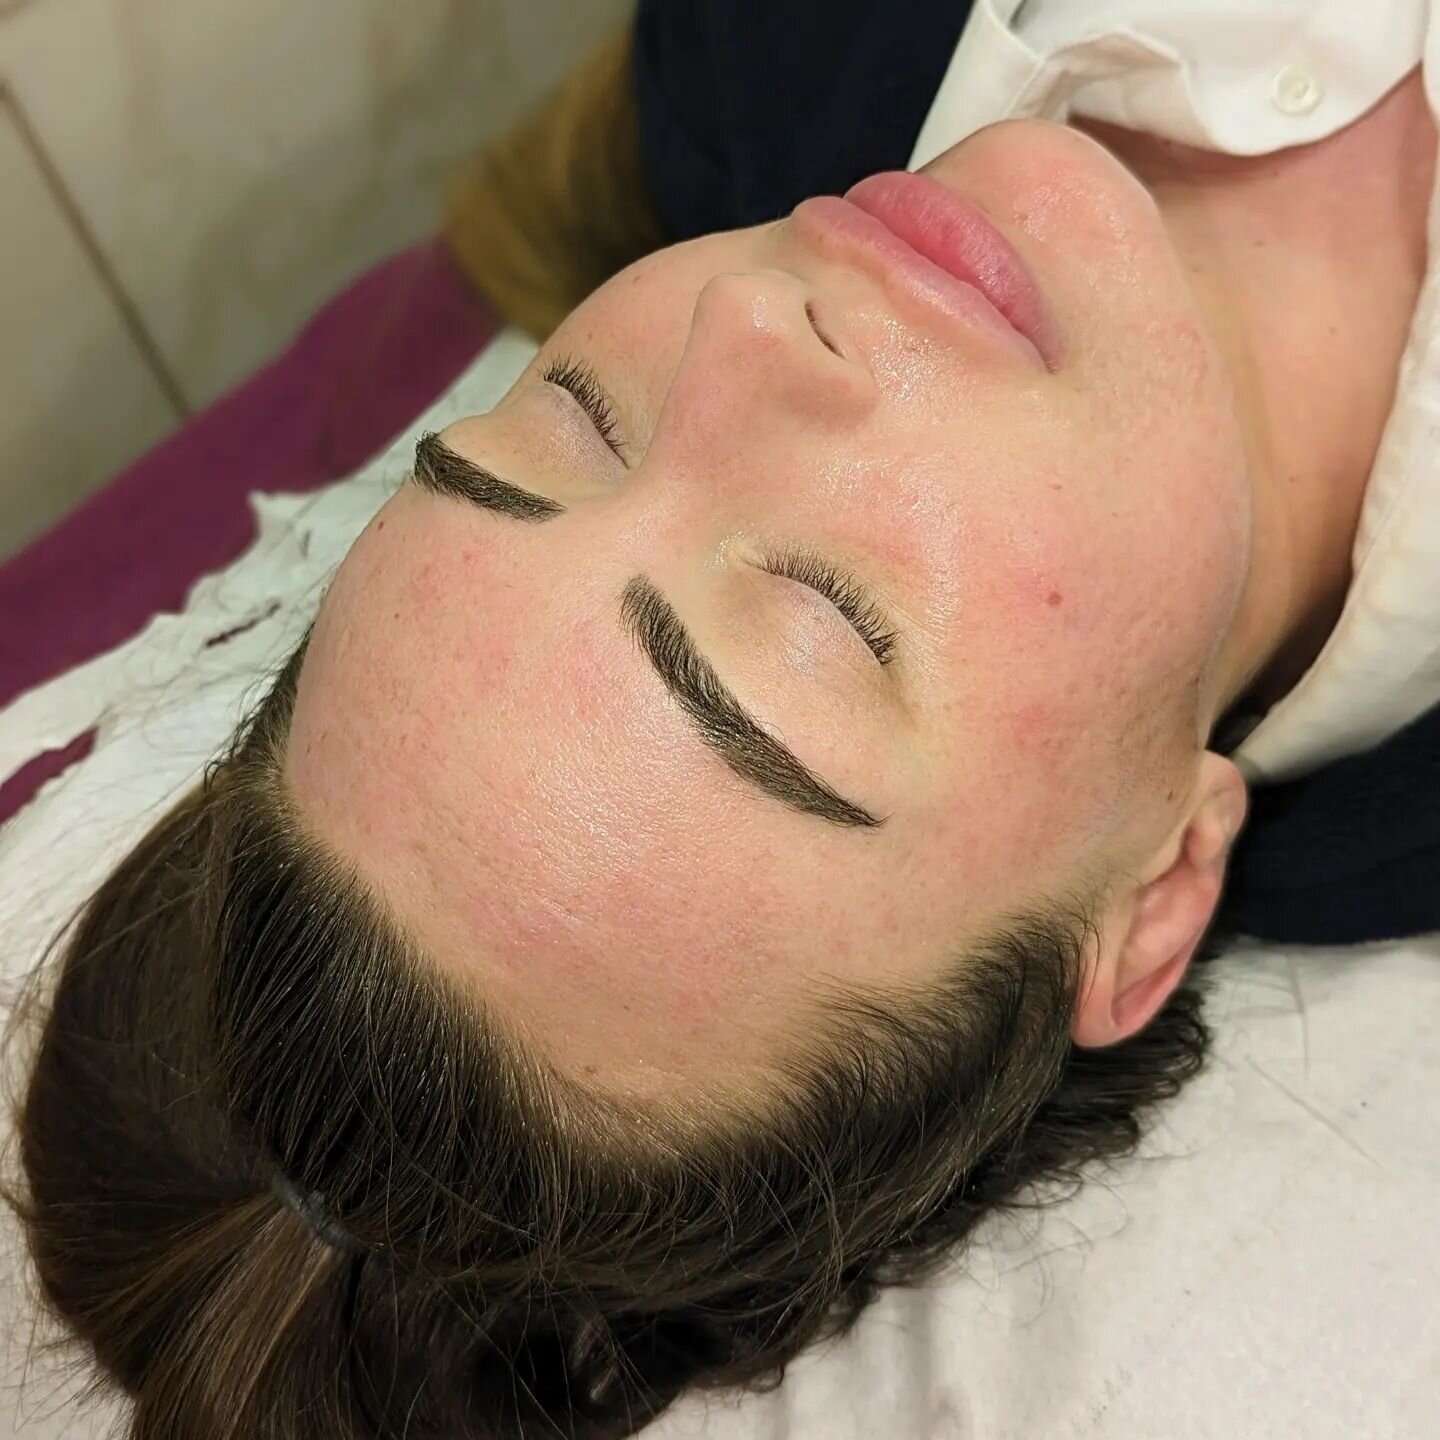 DERMAPLANING ☀️ Results Straight After Treatment With Erin.

Swipe To See What Was Removed During Treatment.

What Are The Benefits Of Dermaplaning?
☀️Provides Deeper Product Penetration.
☀️Removes Soft Facial Hair That Traps Dirt &amp; Oils.
☀️Promo